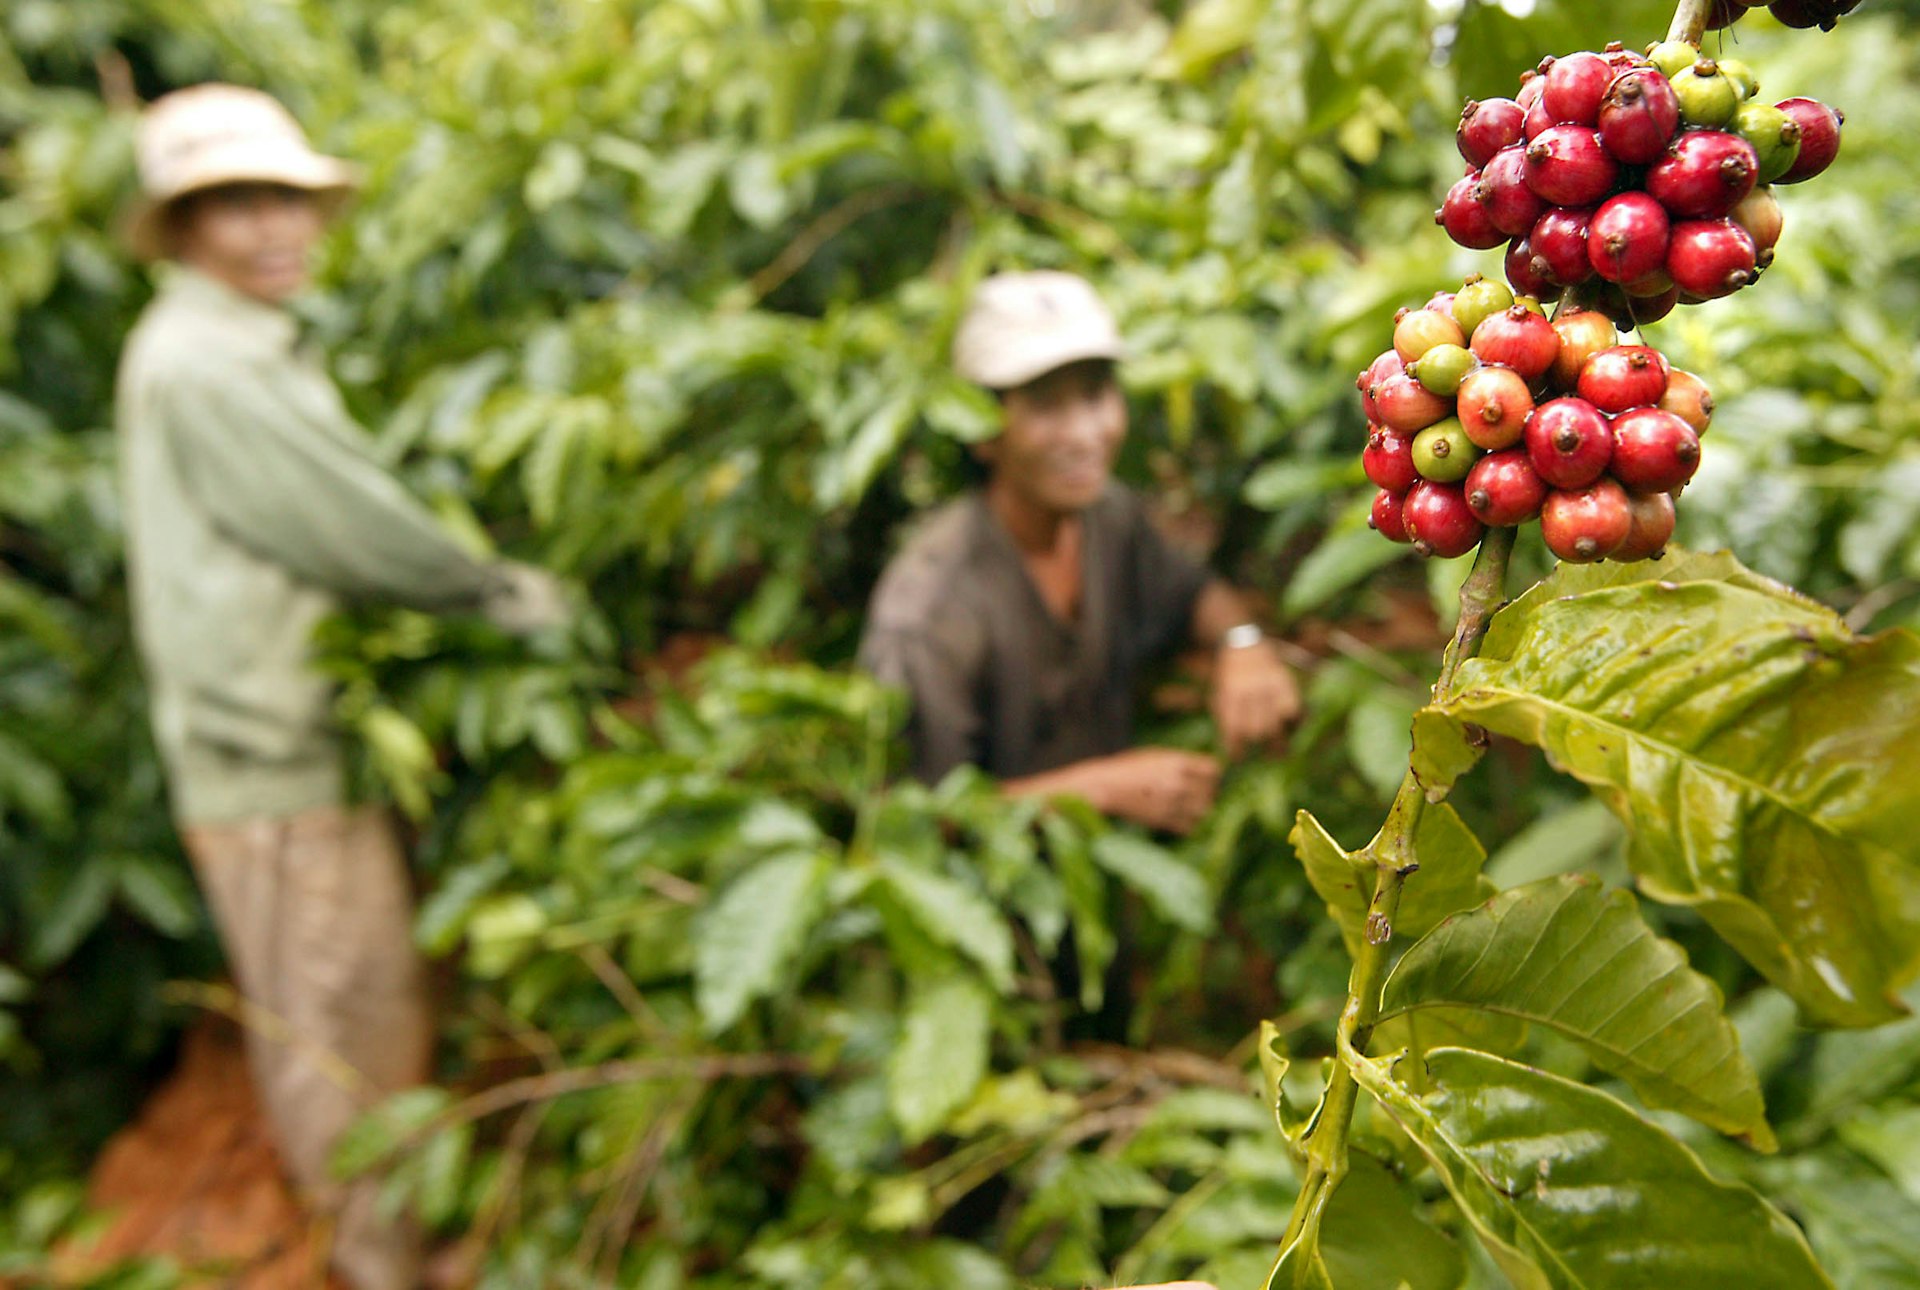 Plantation workers pick ripe coffee cherries during harvest season in Buon Ma Thuot, Vietnam.